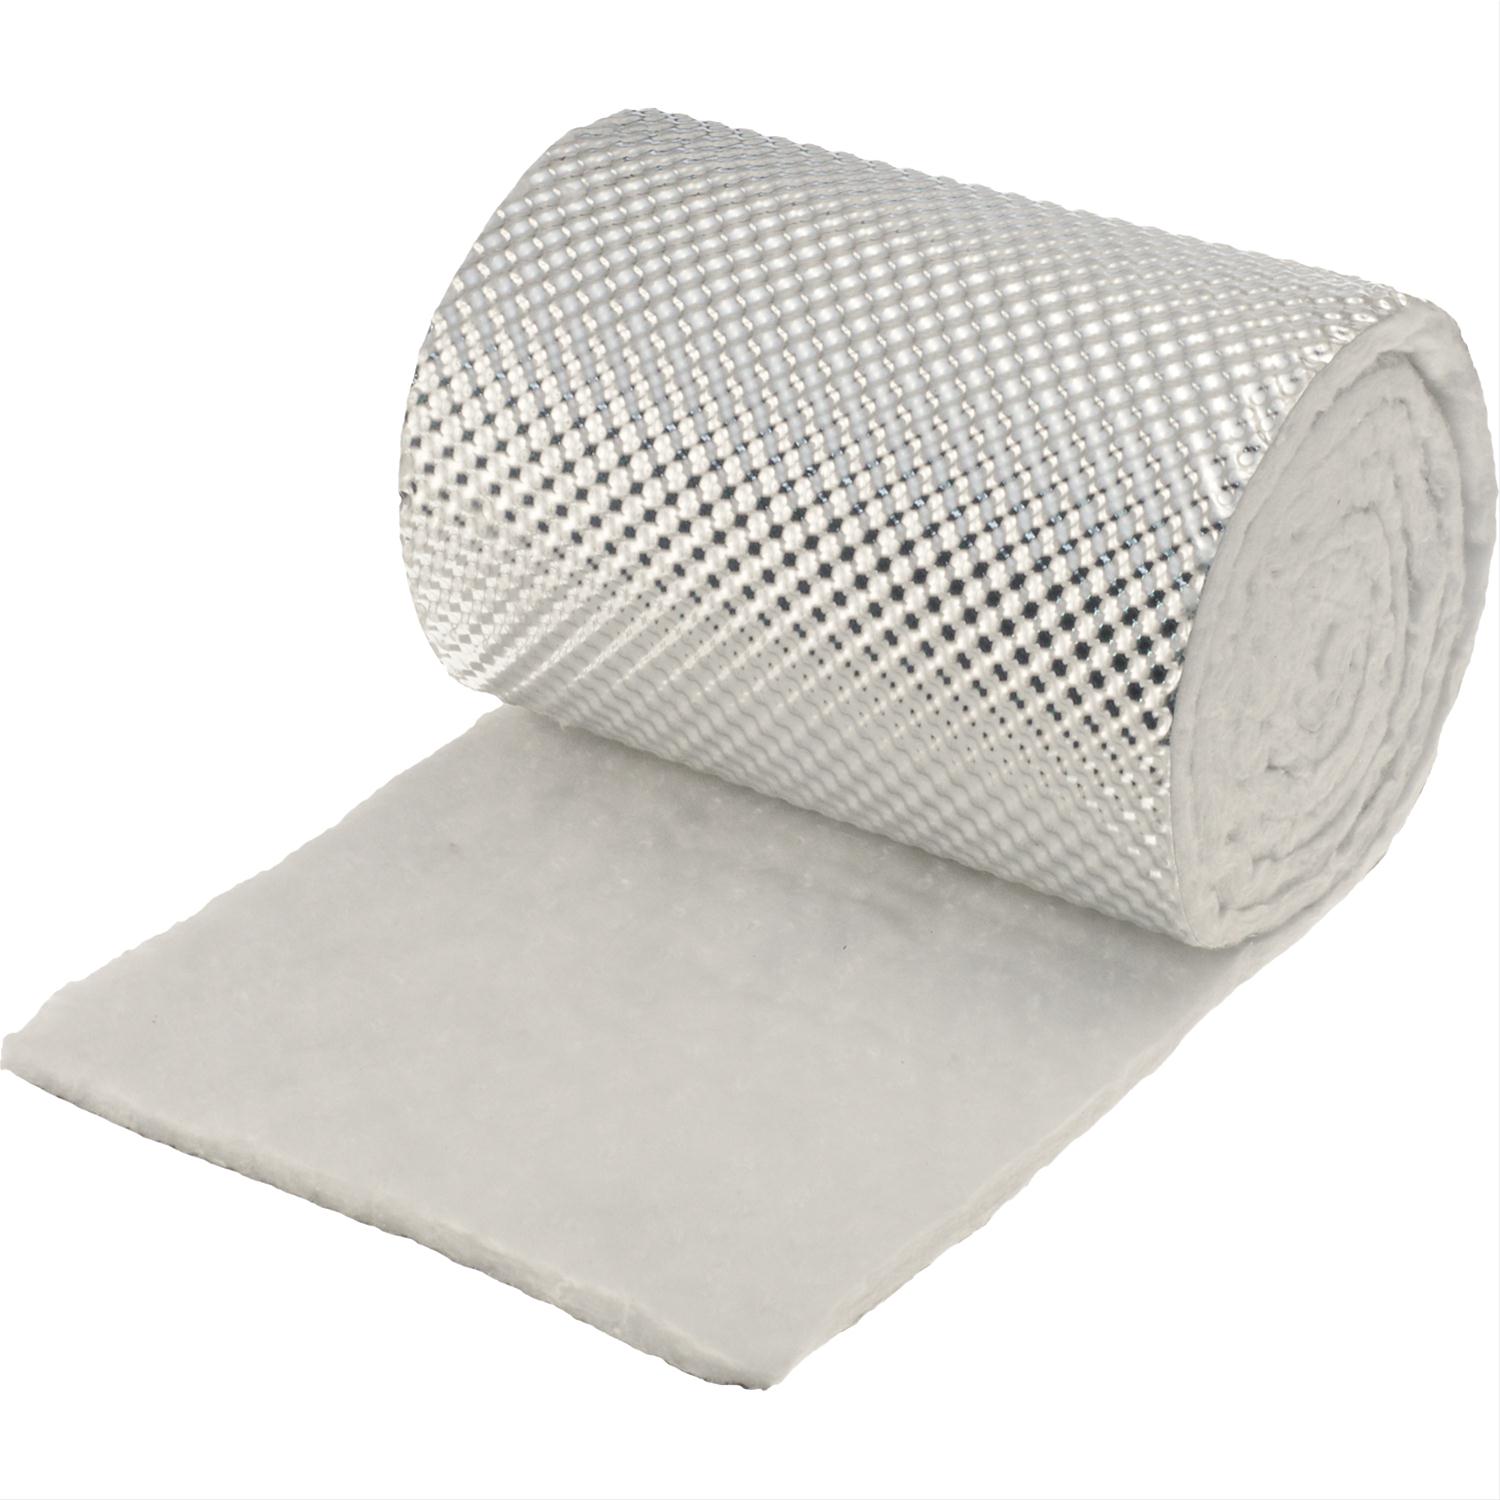 Heatshield Products 750002 0.014 Thick x 24 x 24 Cobra Cloth Thermal Barrier 